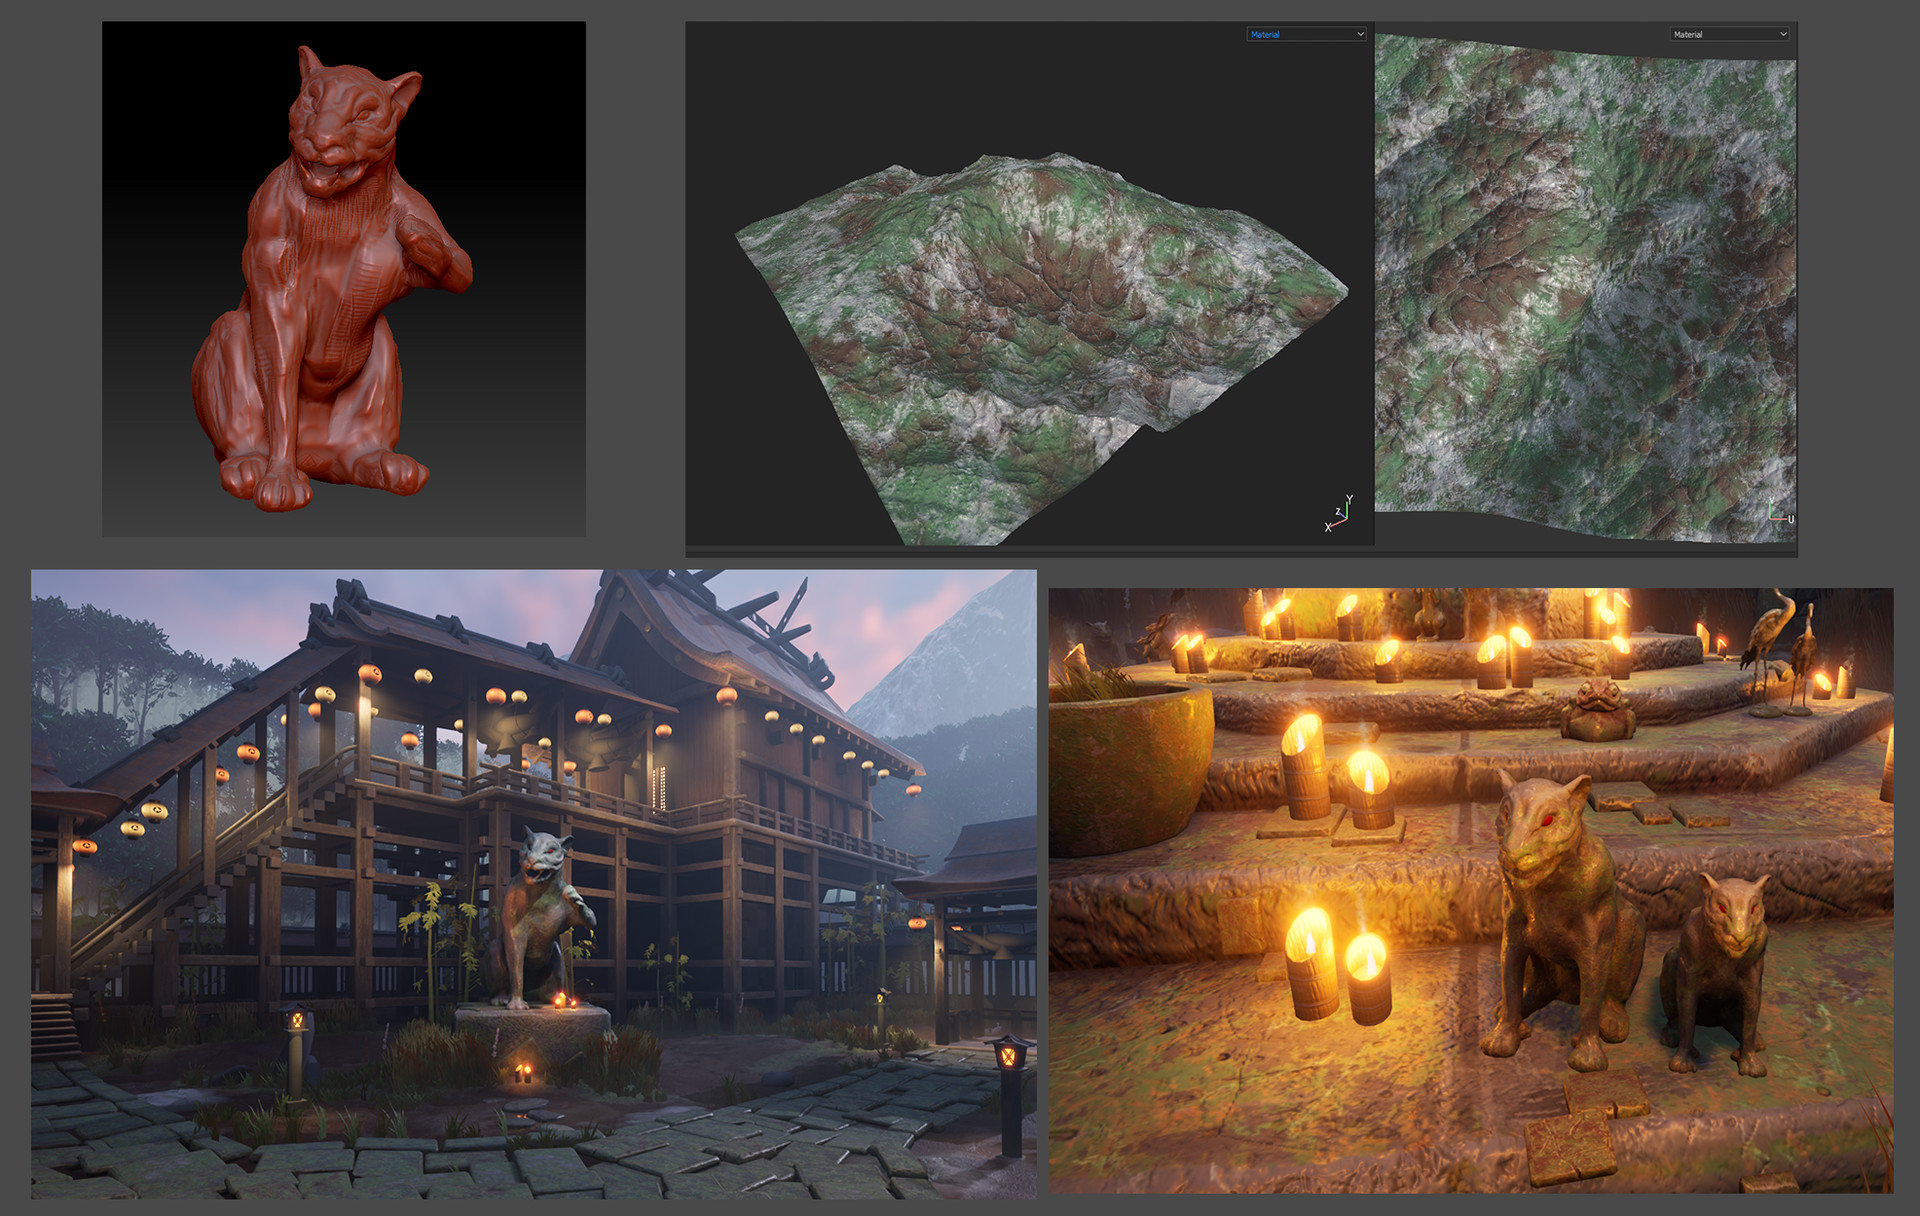 An image with 4 screenshots put together. First one is a Zbrush sculpt of a lion. Next is a Substance Painter screenshot showing a World Machine mountain prop being texture. Below is an Unreal 4 look of that same lion statue in the first picture, now being in use. Last image is that statue, but this time scaled down tiny, and used around the other small animal statues where the circular shrine and bamboo candles are.